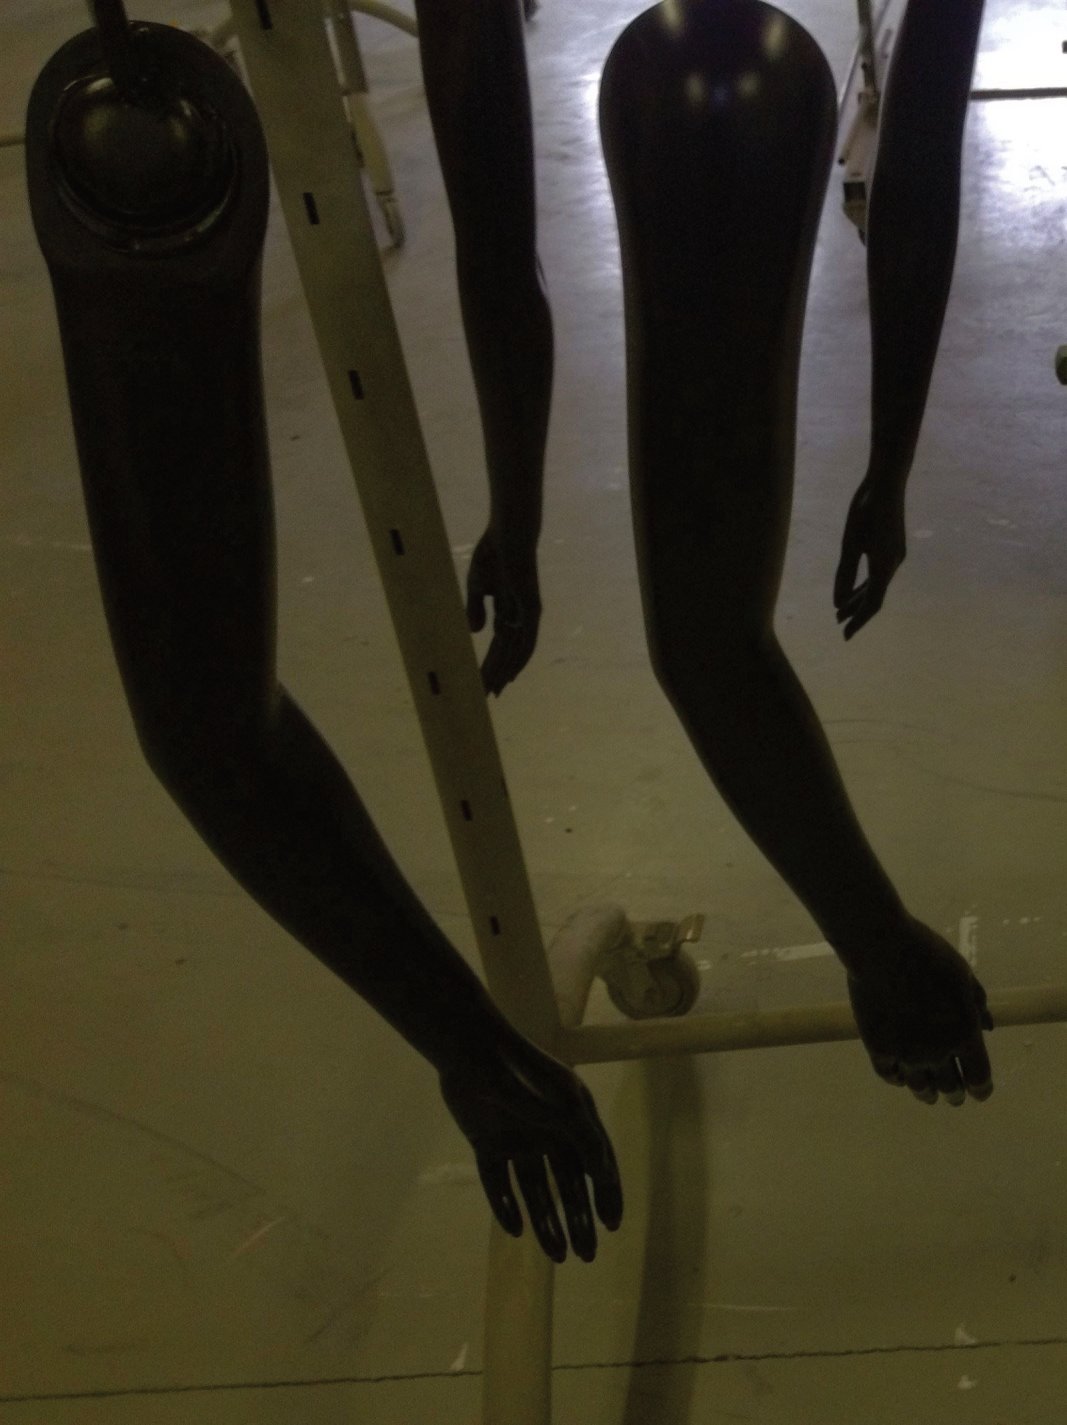 MANNEQUINS BY SMIDT DENMARK (PRODUCTION DATE: MARCH 2013 DENMARK)